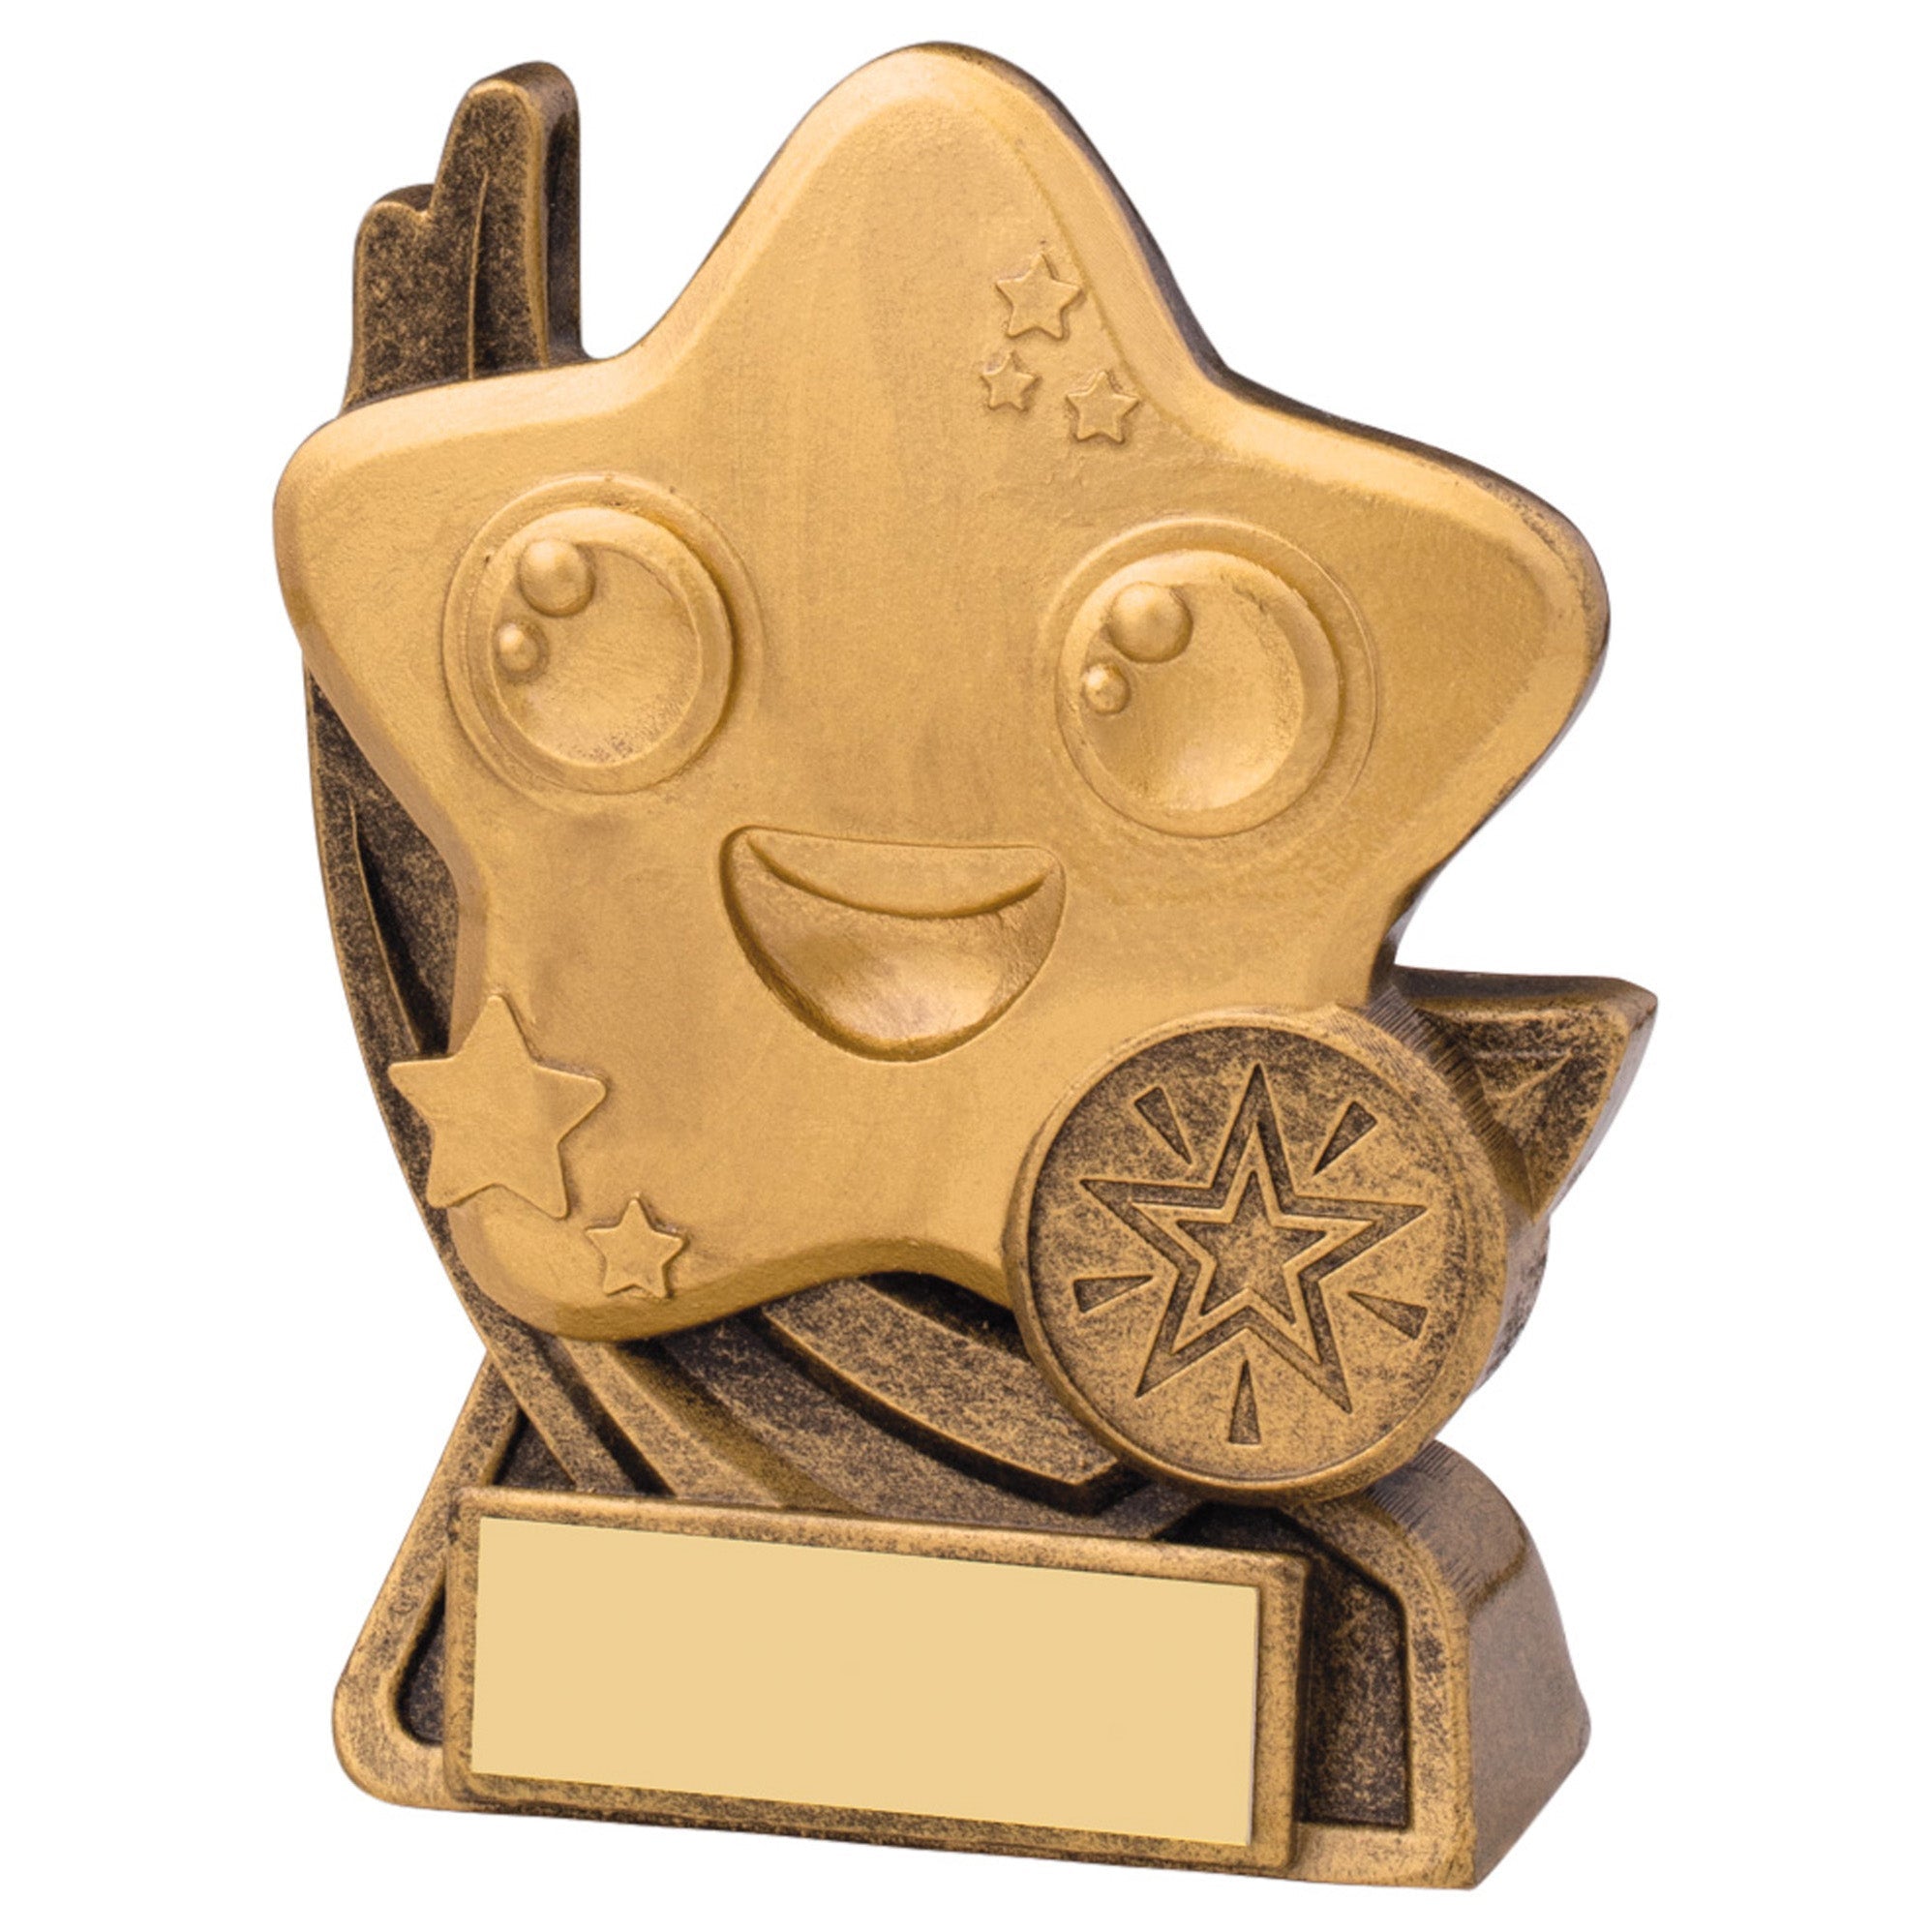 Smiley Star Motion Resin Award - Available with Engraving and Custom 1" Centre